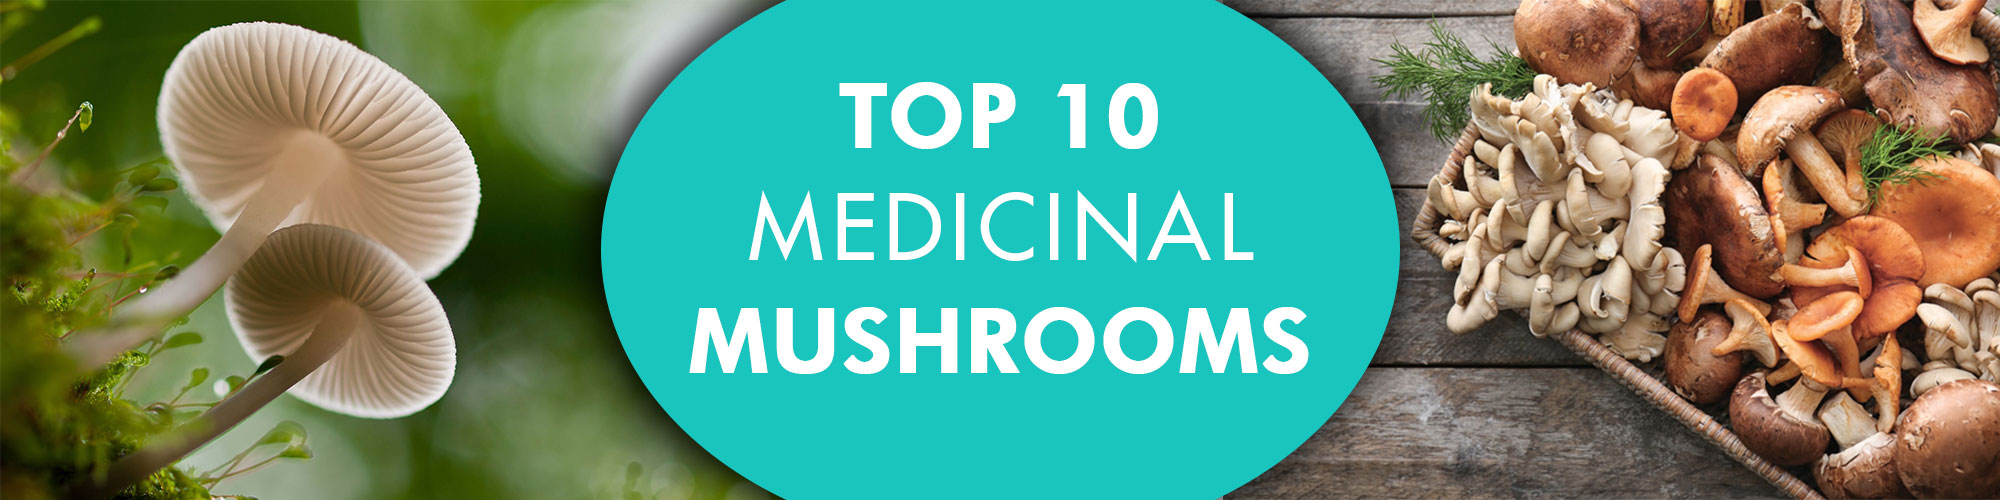 Blog title: "Top 10 Mushrooms for health" with images of mushrooms 